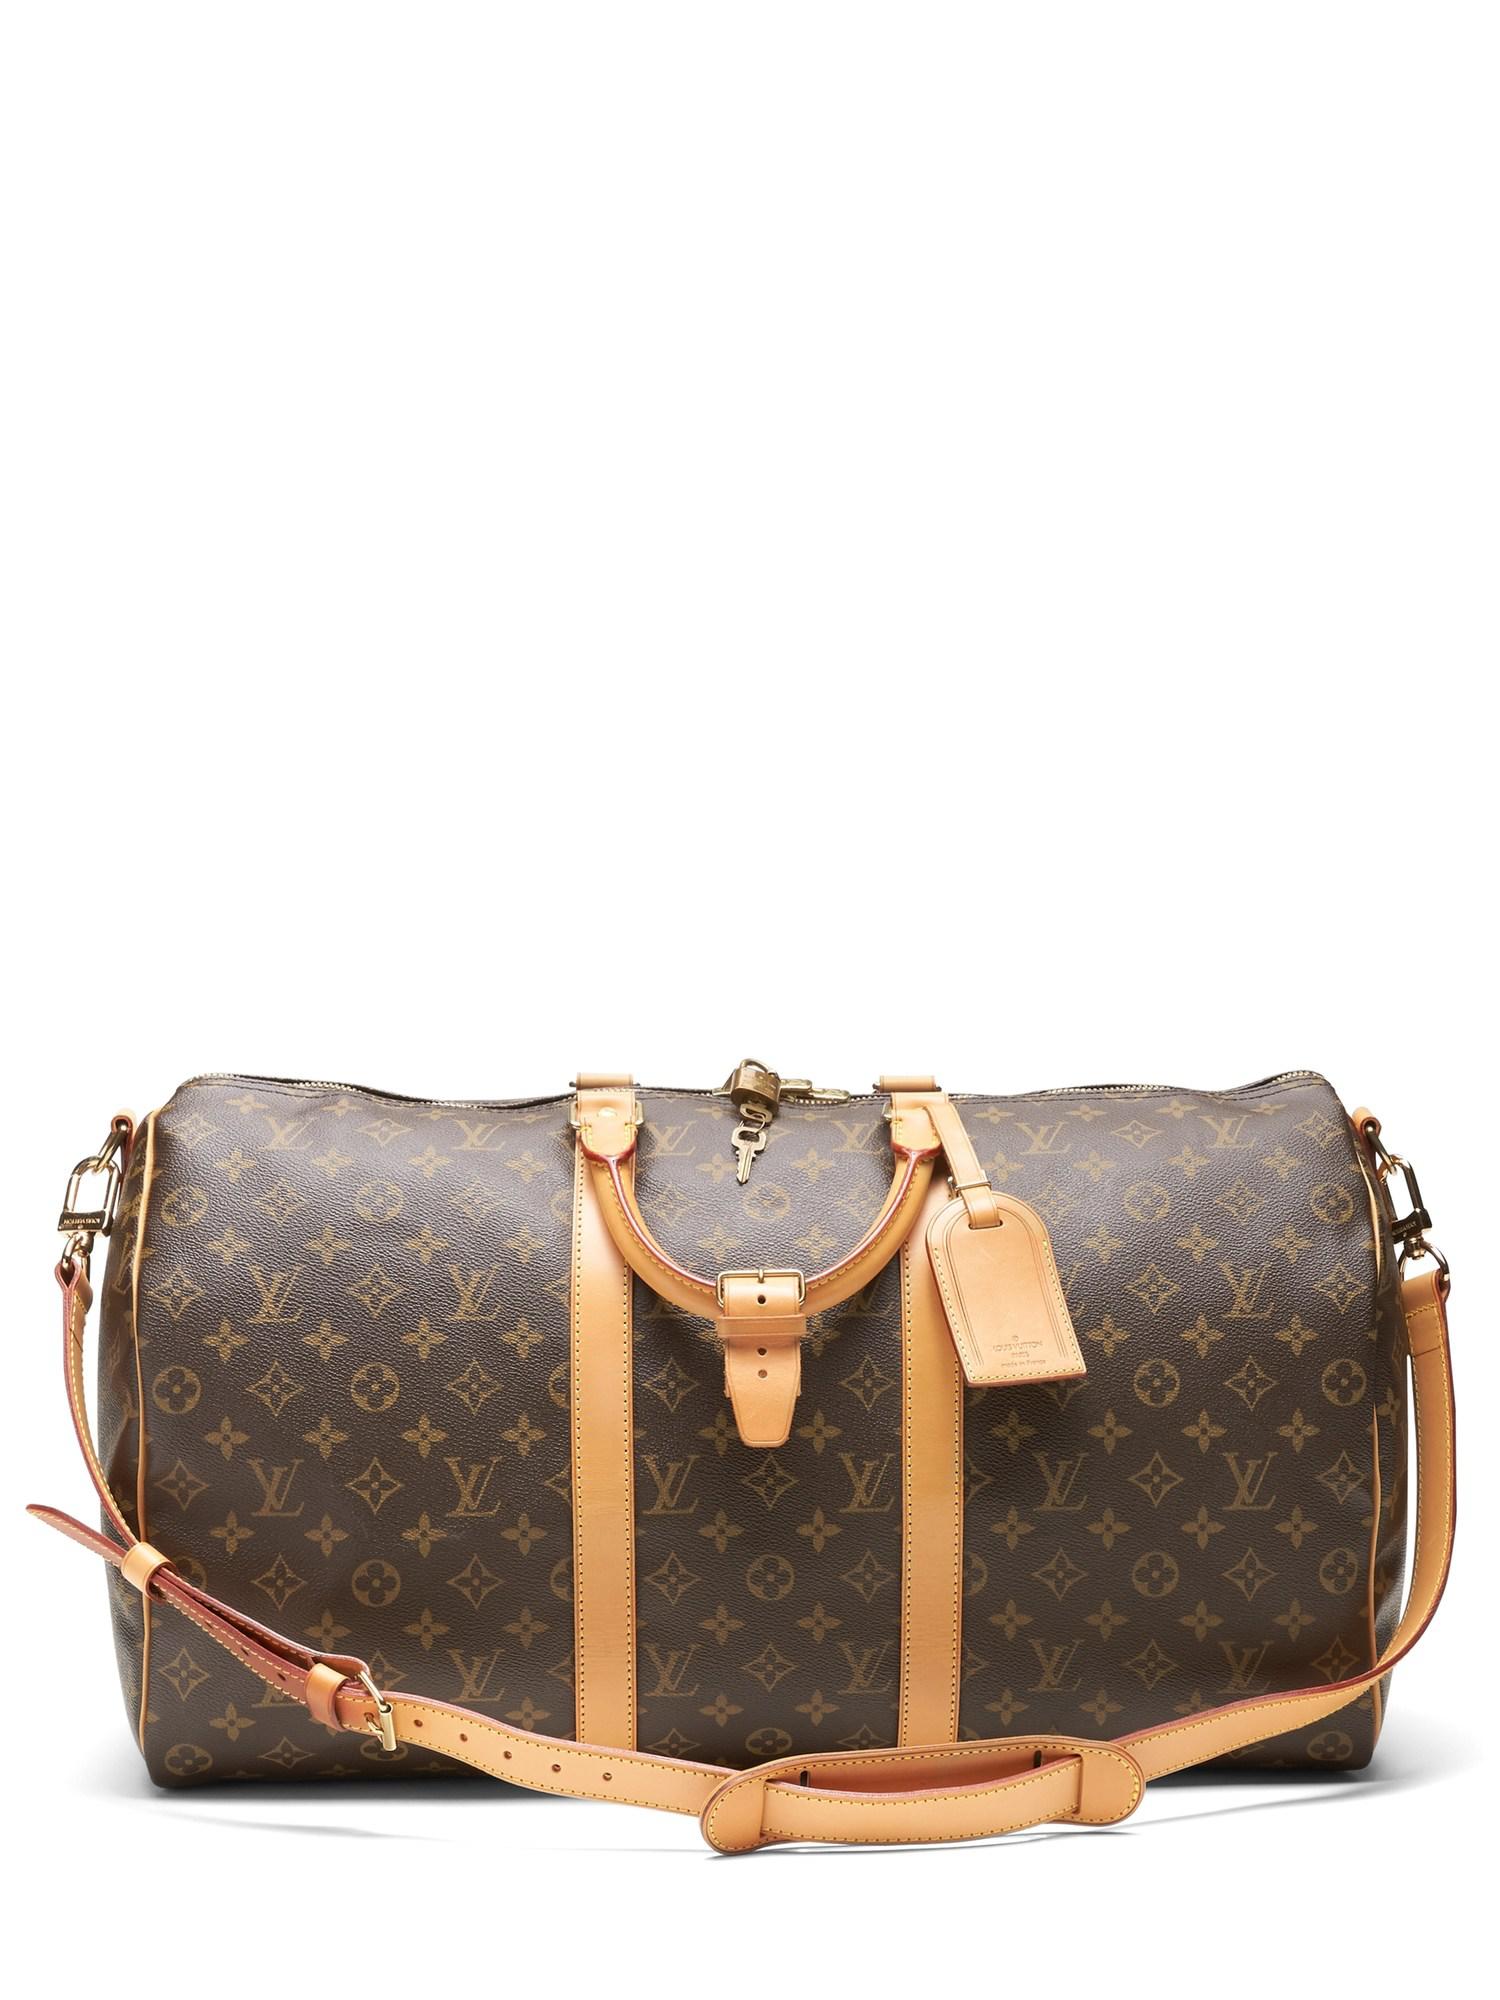 Banana Republic Luxe Finds | Louis Vuitton Monogram Keepall Bandoulière 50 in Rust Brown (Brown ...